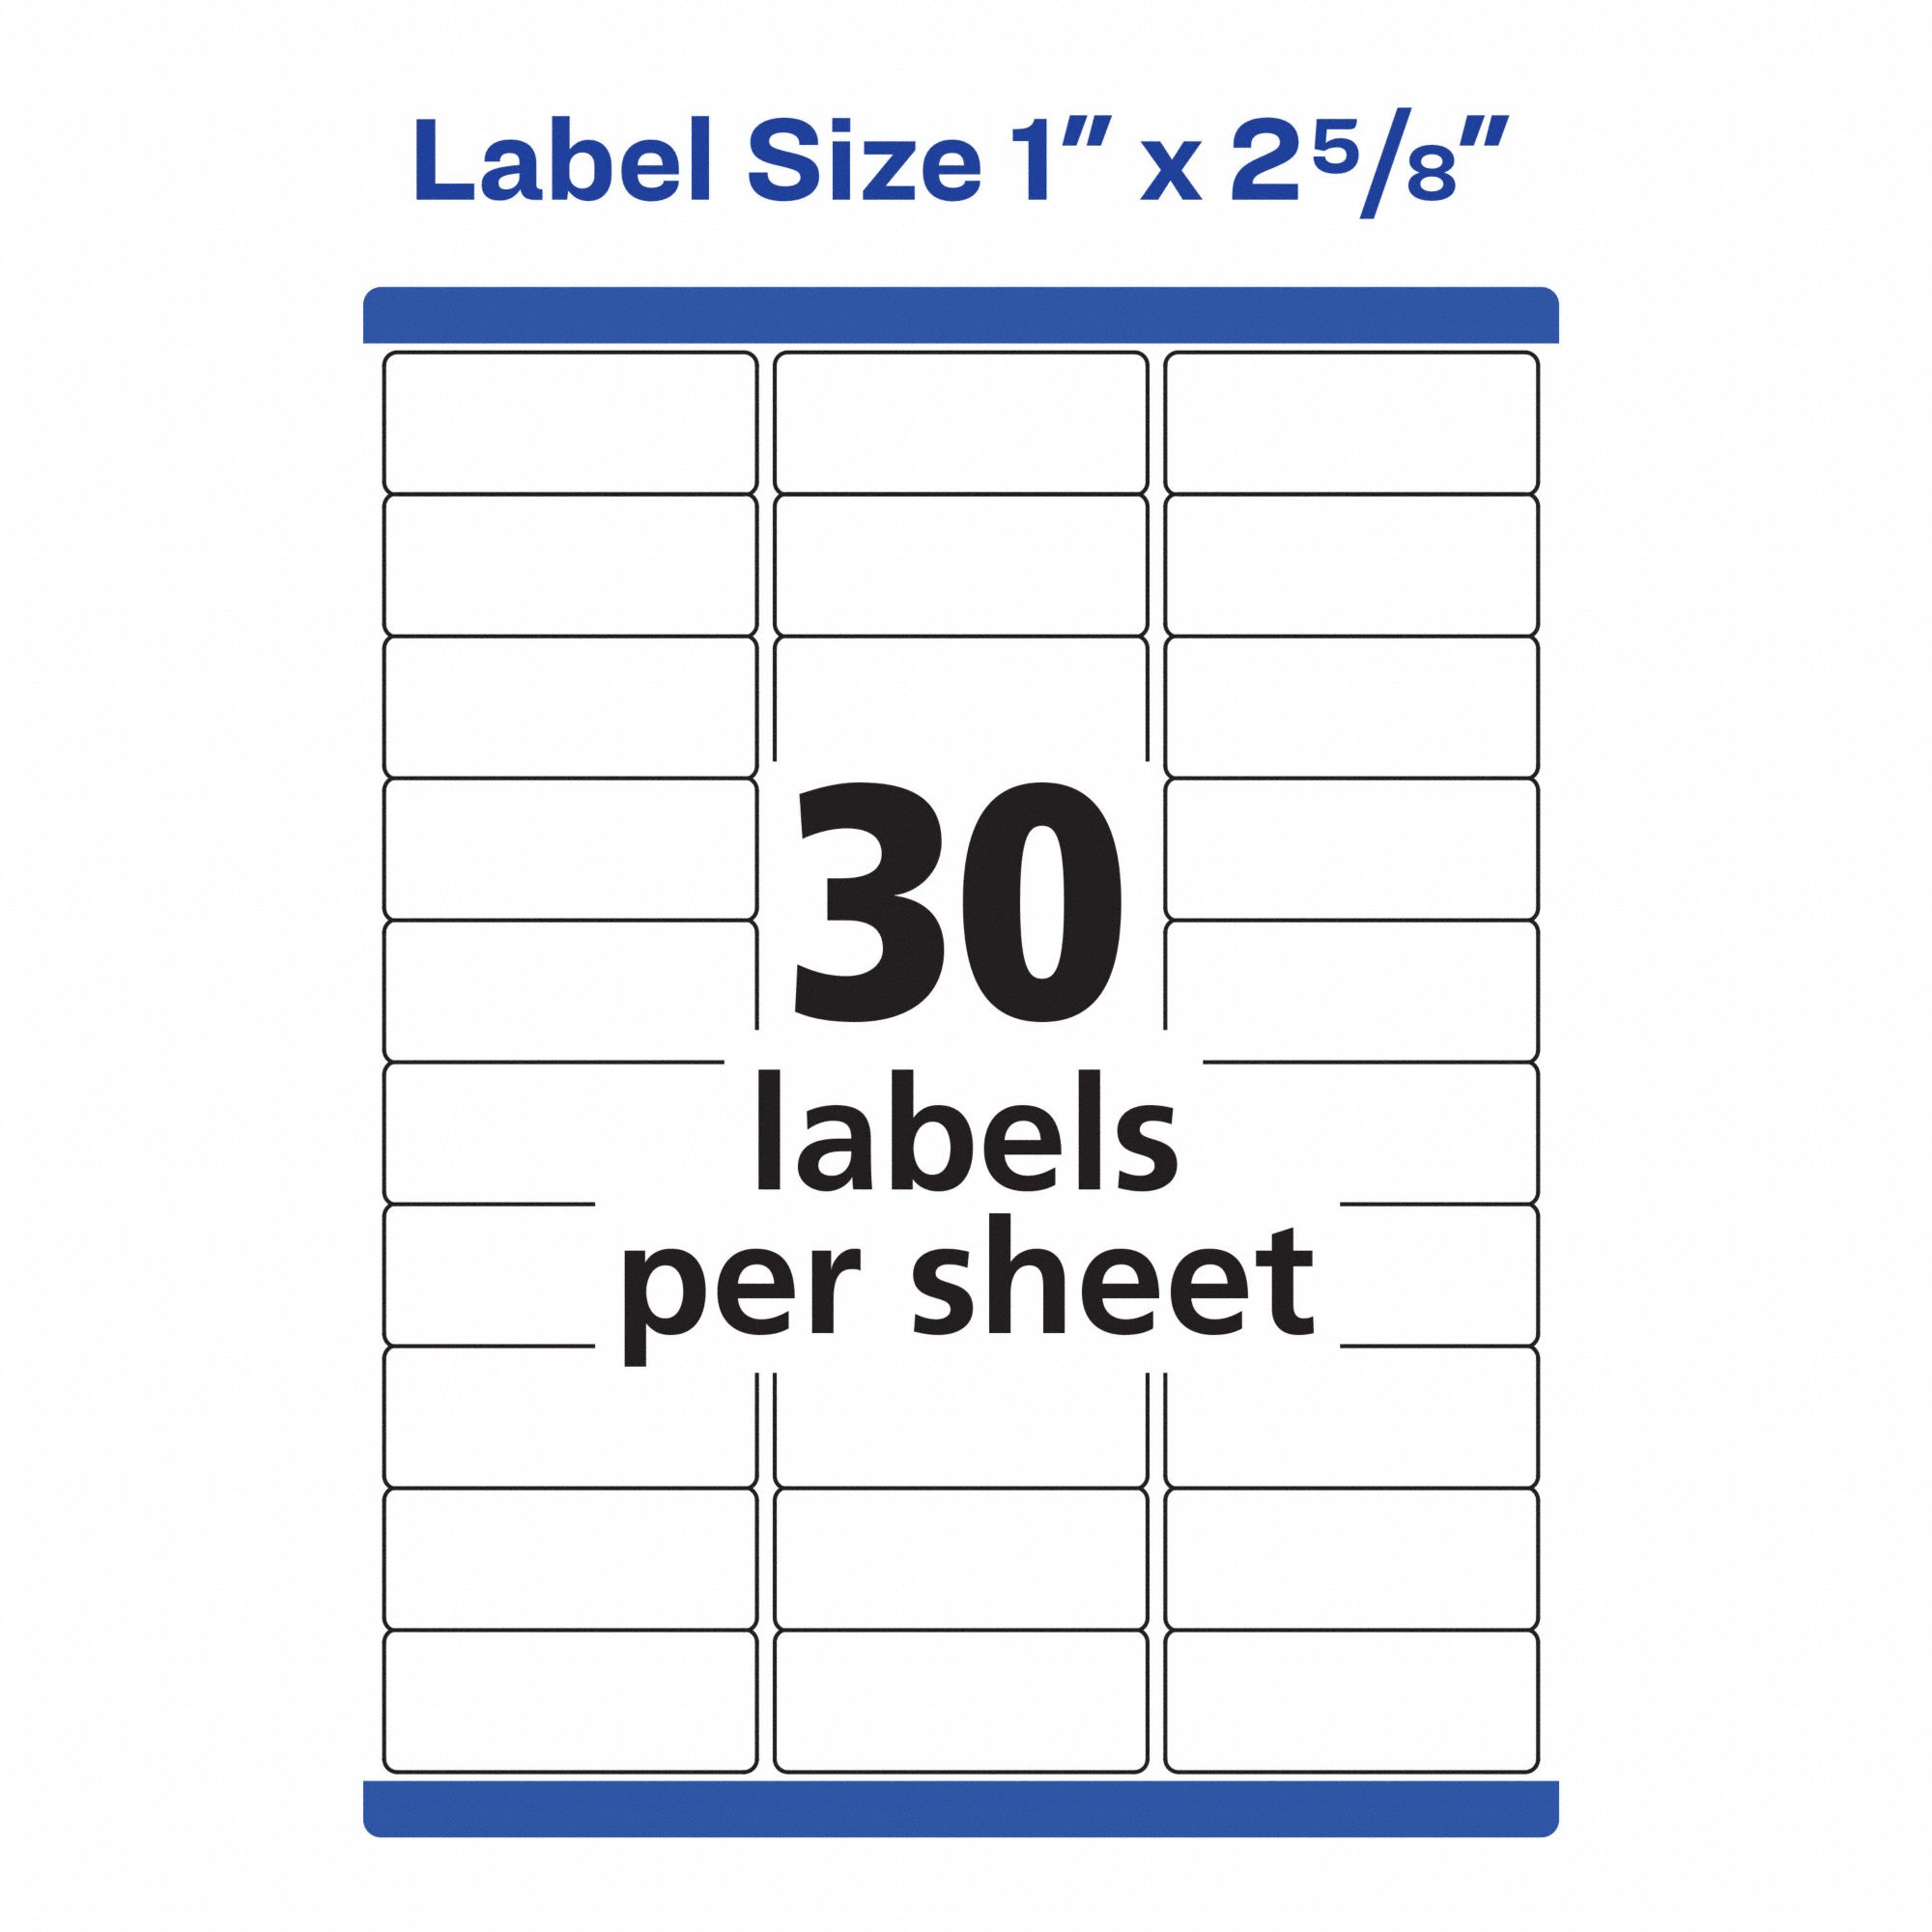 AVERY Laser Label 5 520 Avery Template White 1 In Label Ht 2 5 8 